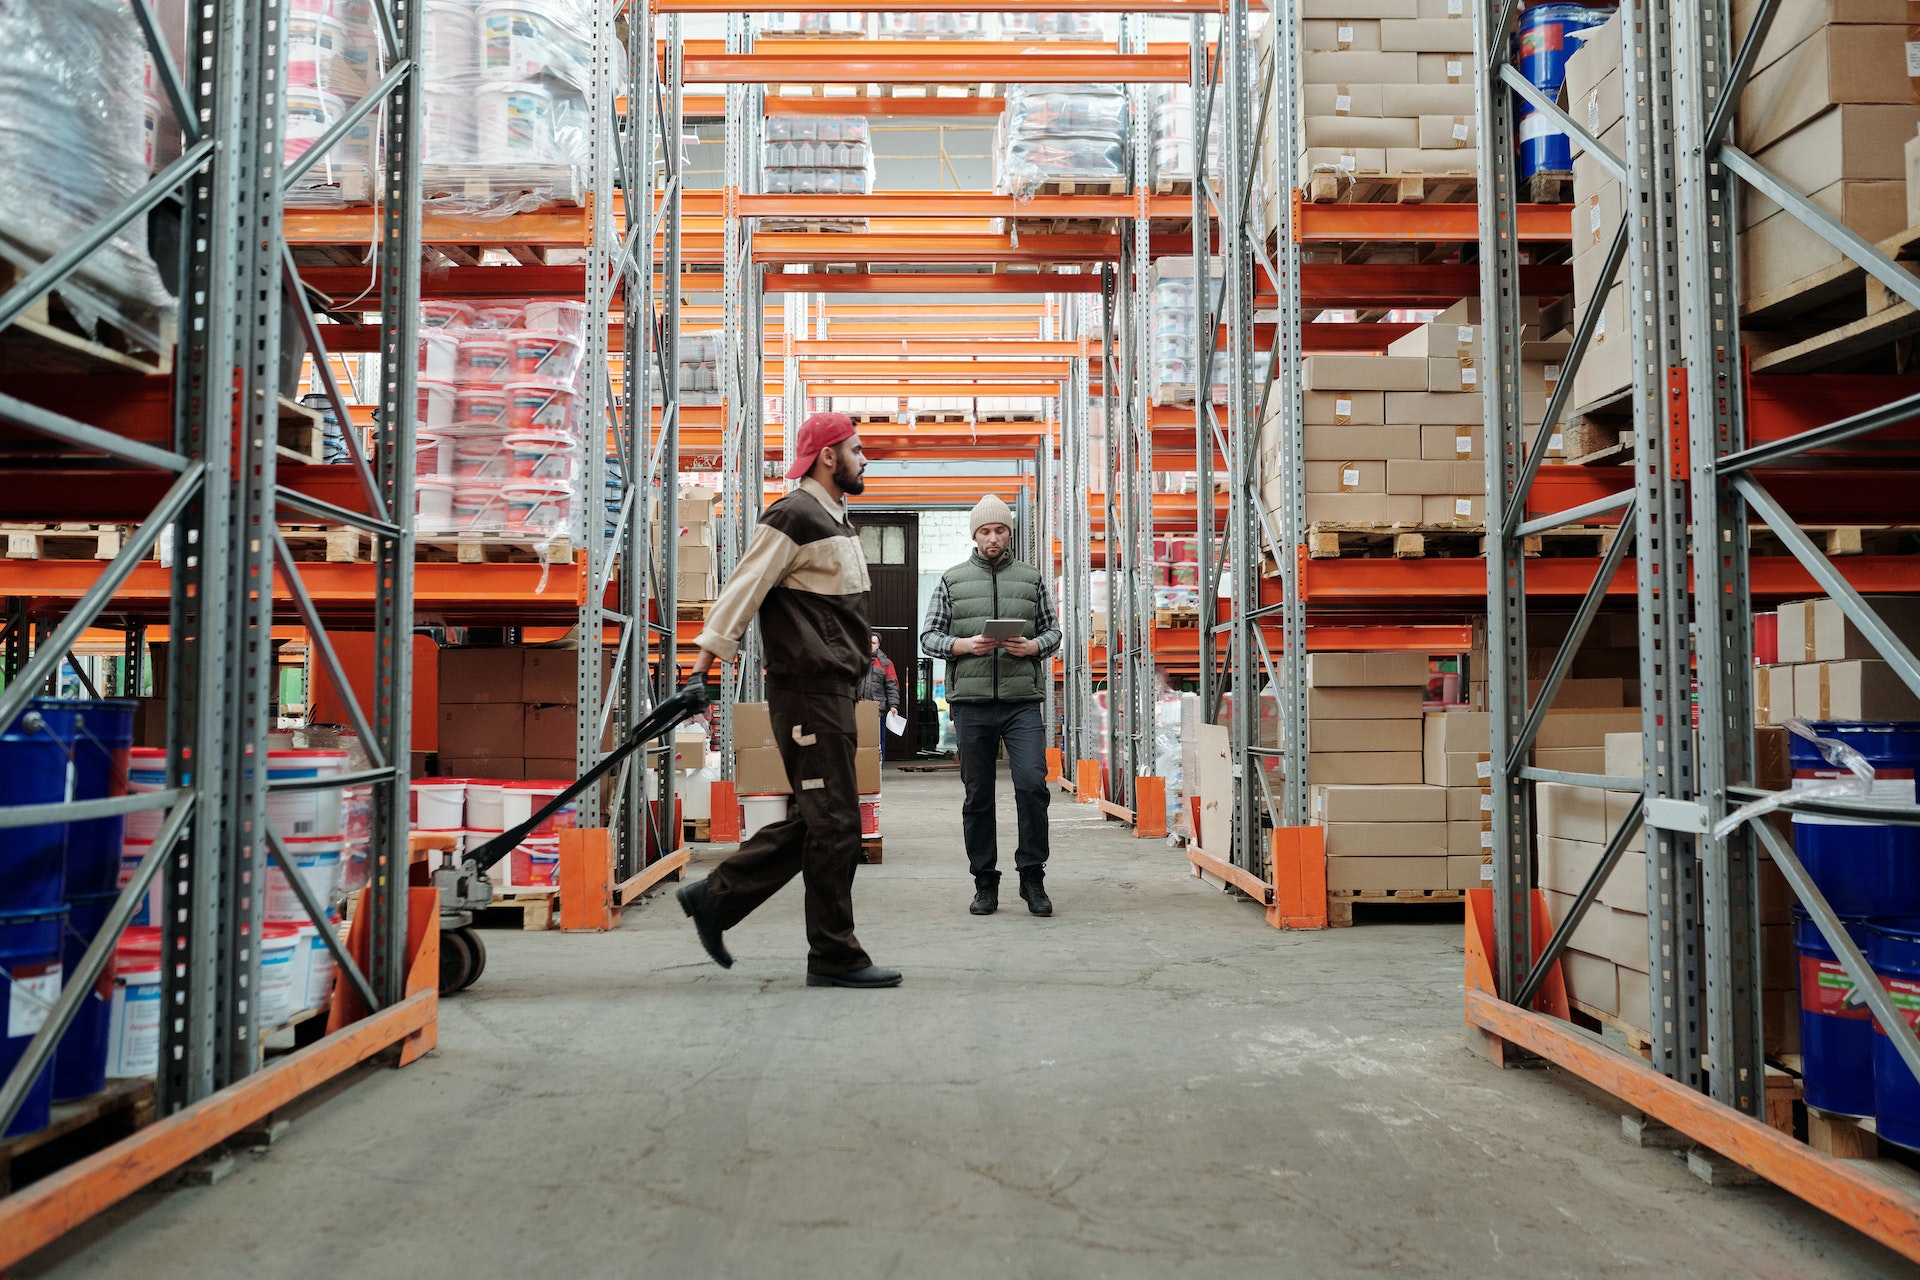 Warehouse Management Systems (WMS) explained - Understand the Software that Drives Warehouse Efficiency